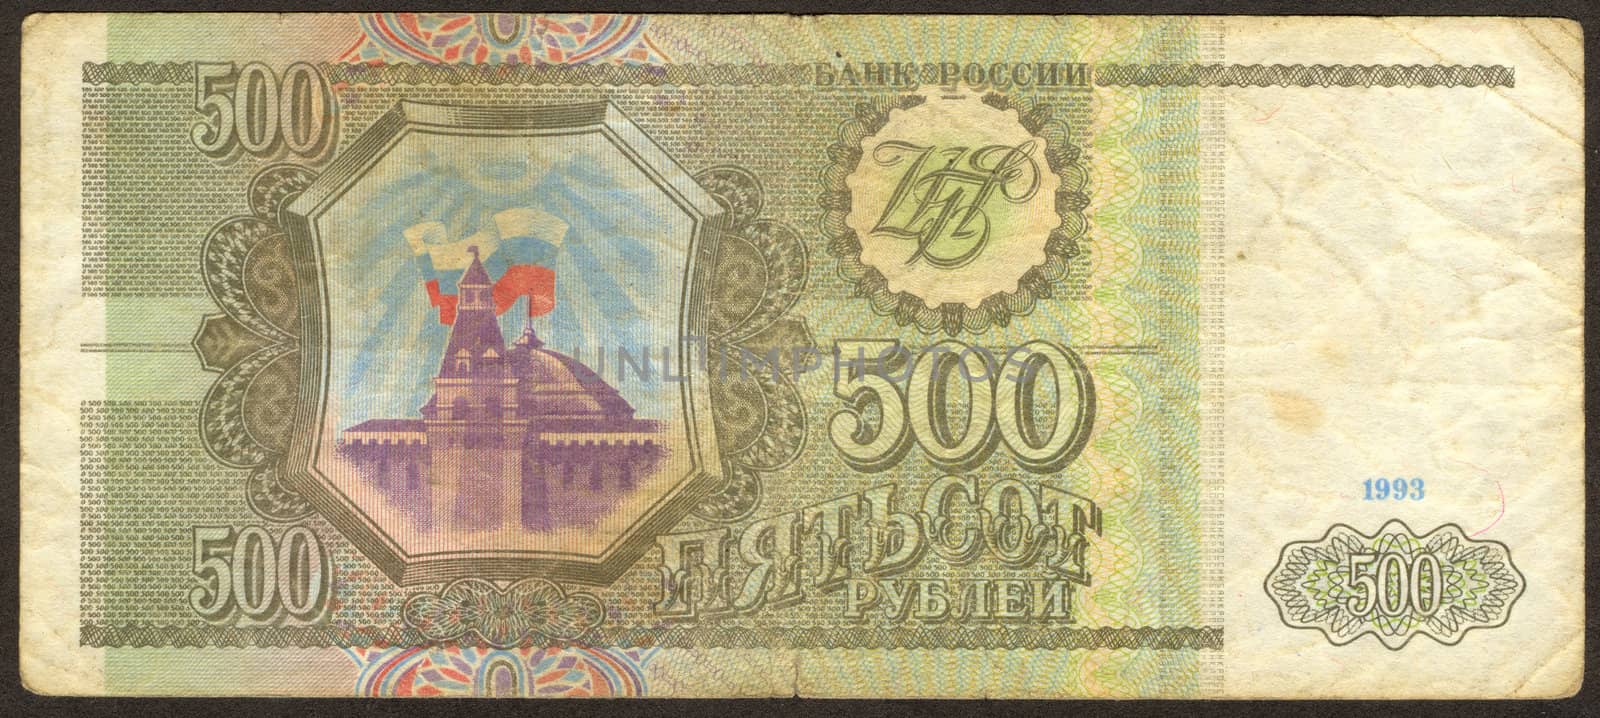 The scanned image of Russian money. Five hundred are made in 1995.